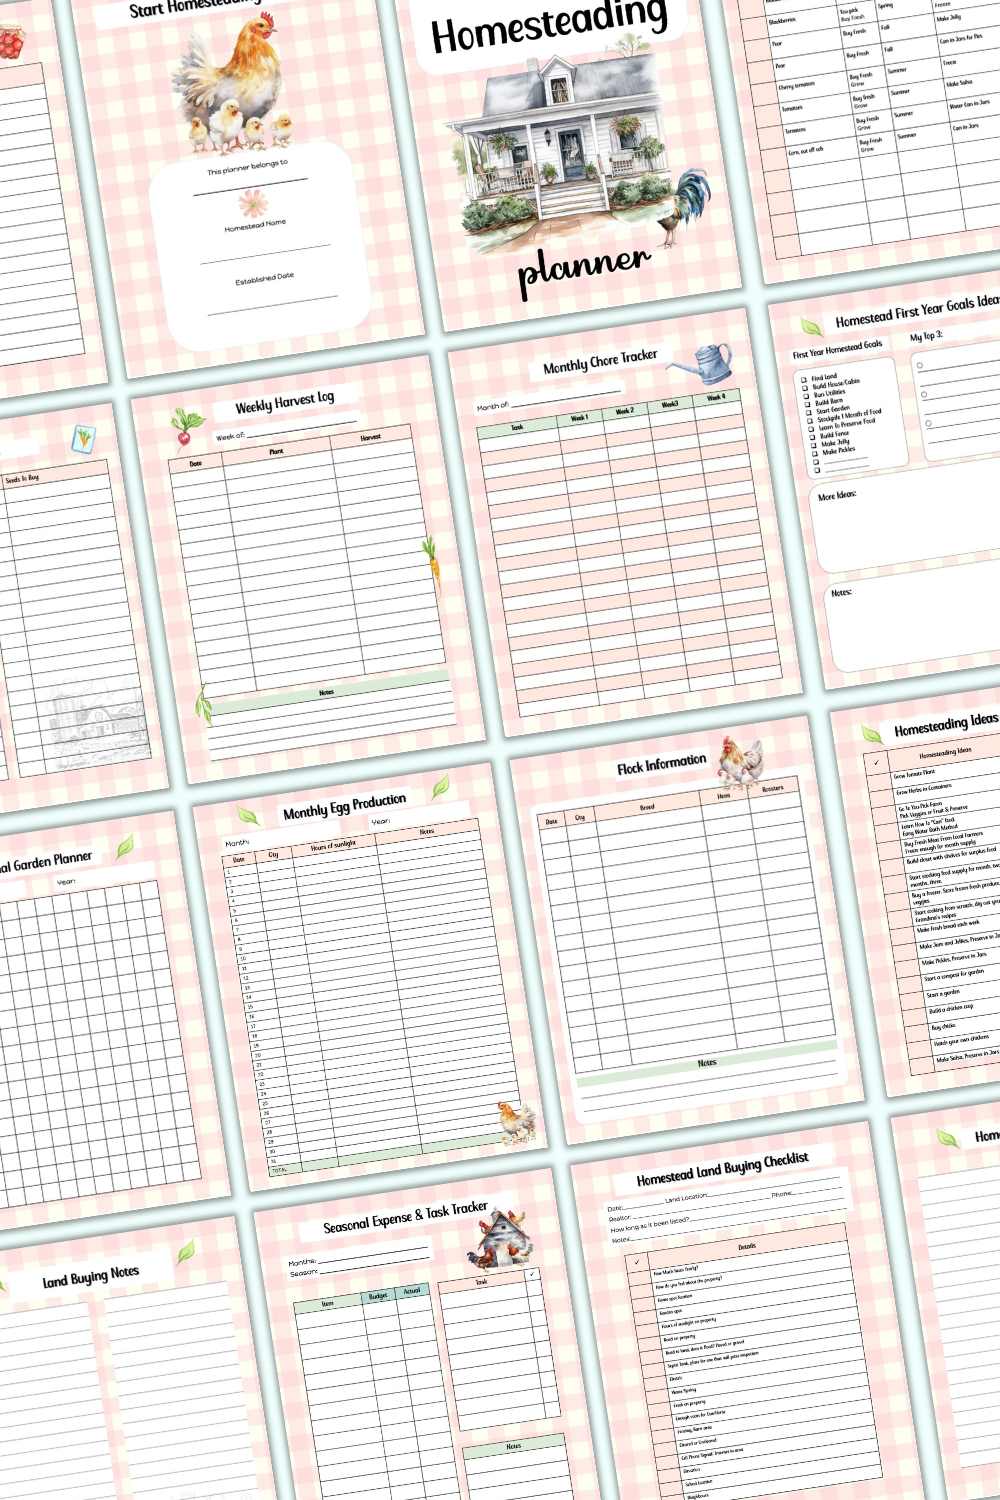 A preview of pages from a homesteading for beginners planner